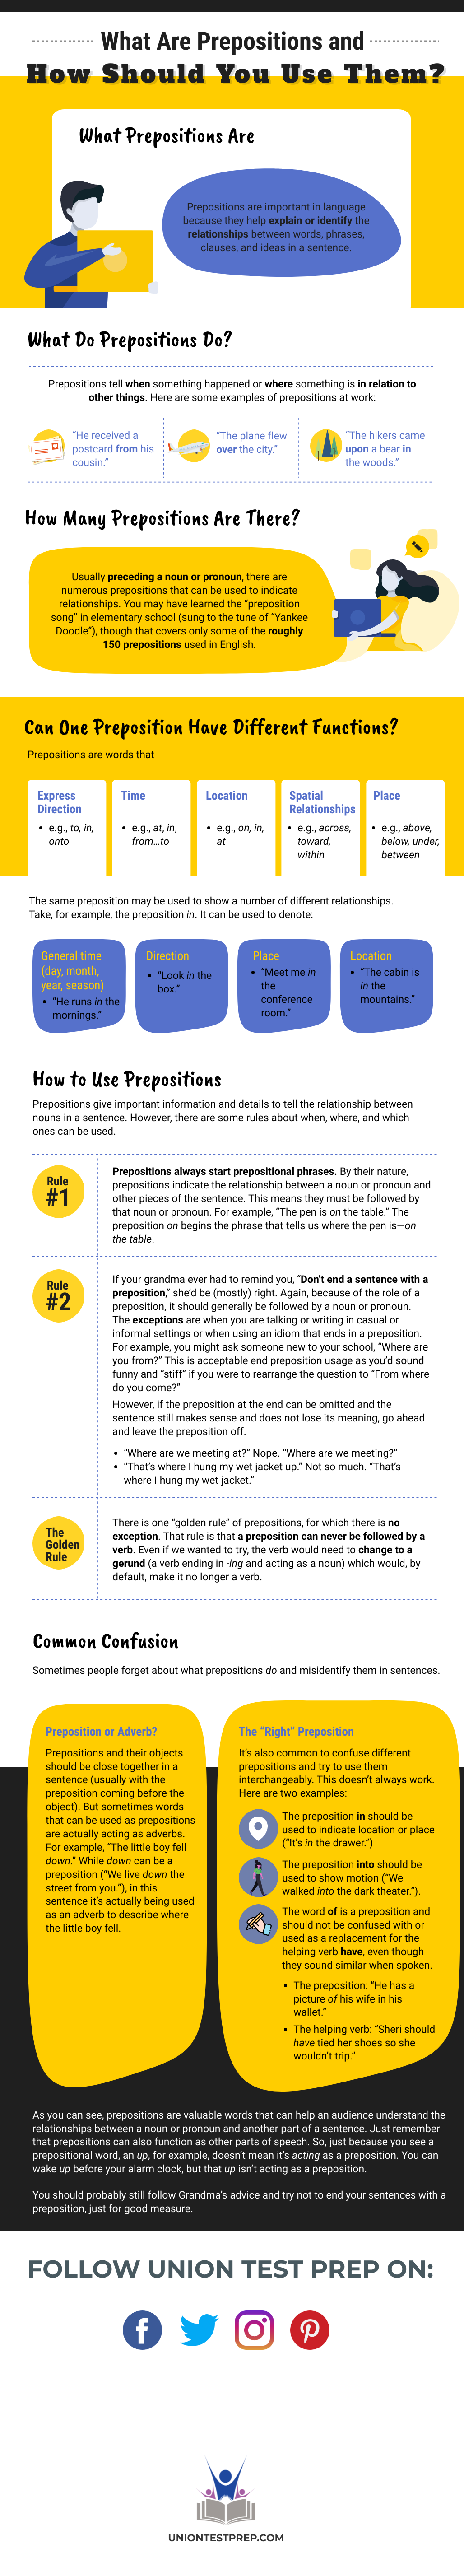 What are Prepositions?